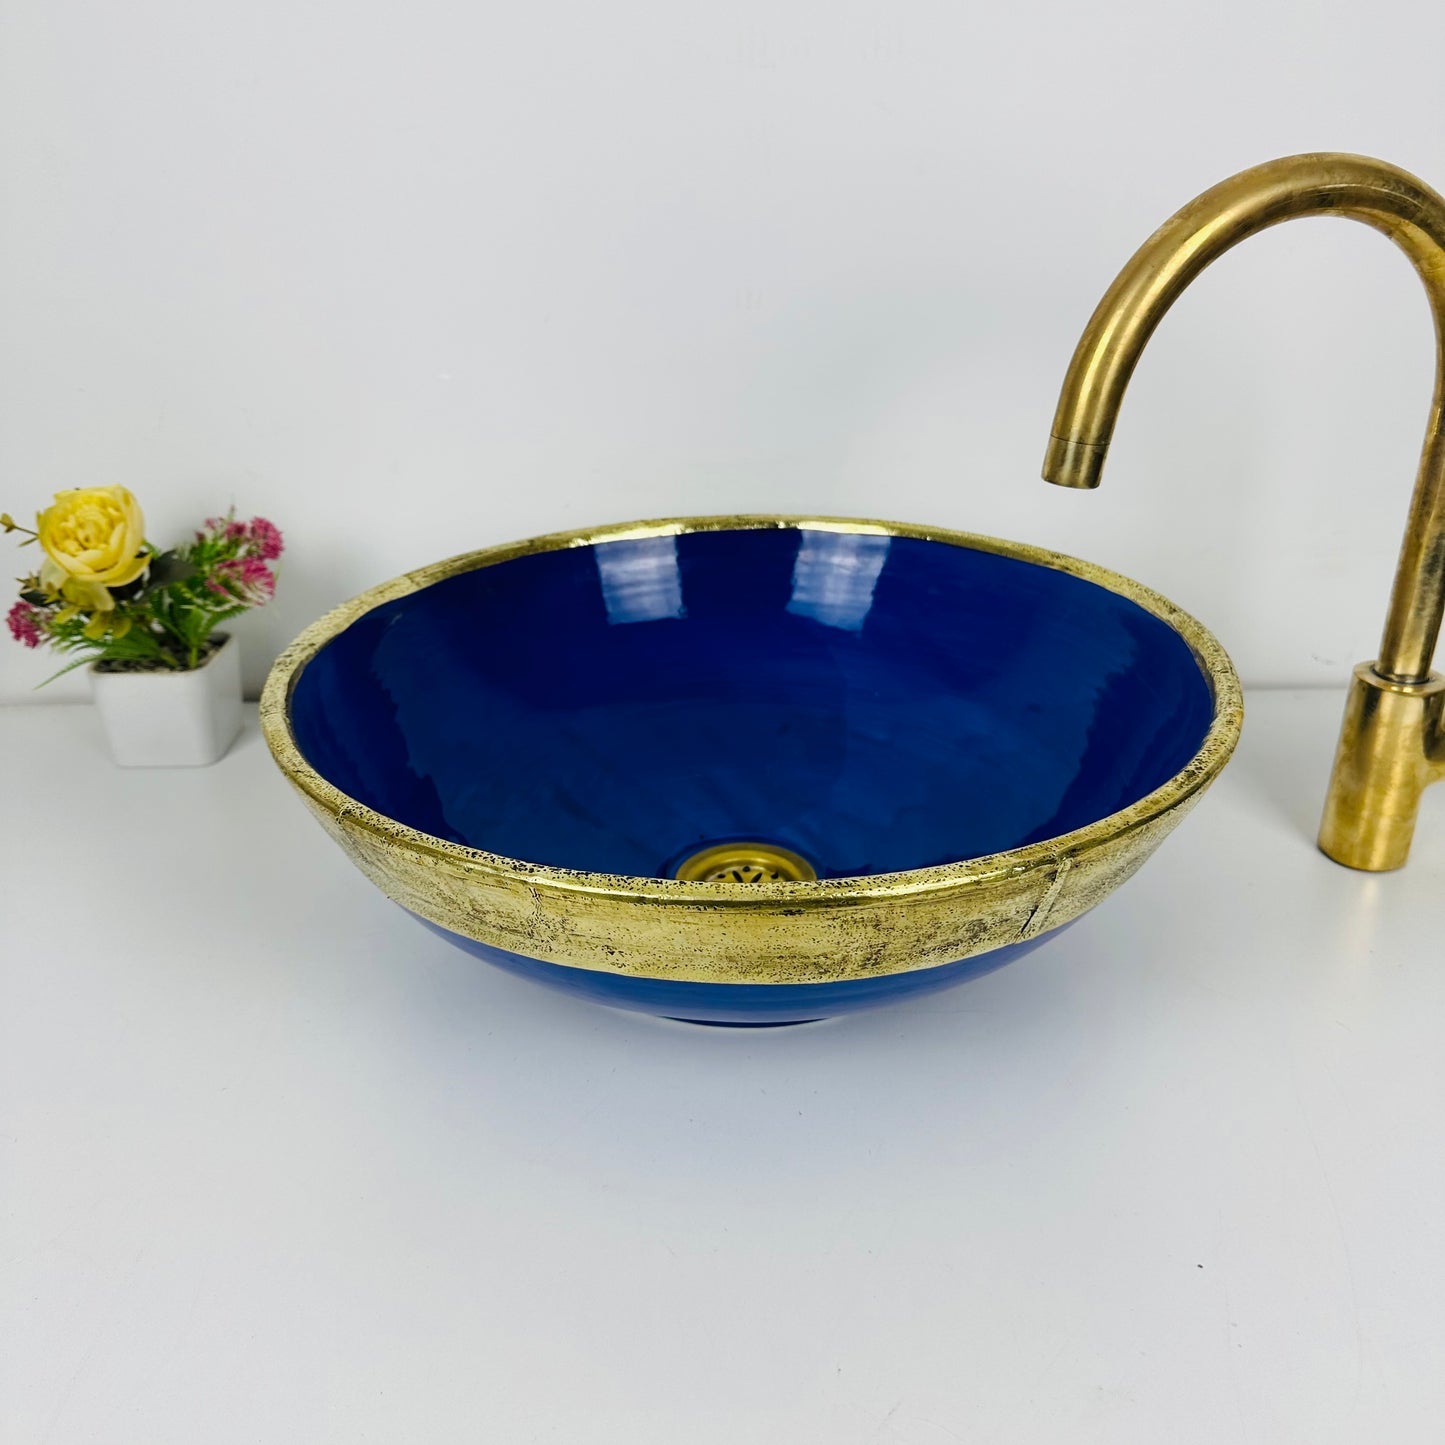 Sapphire Majesty: Handcrafted Ceramic Sink with Dark Blue and Gold Brass Accent